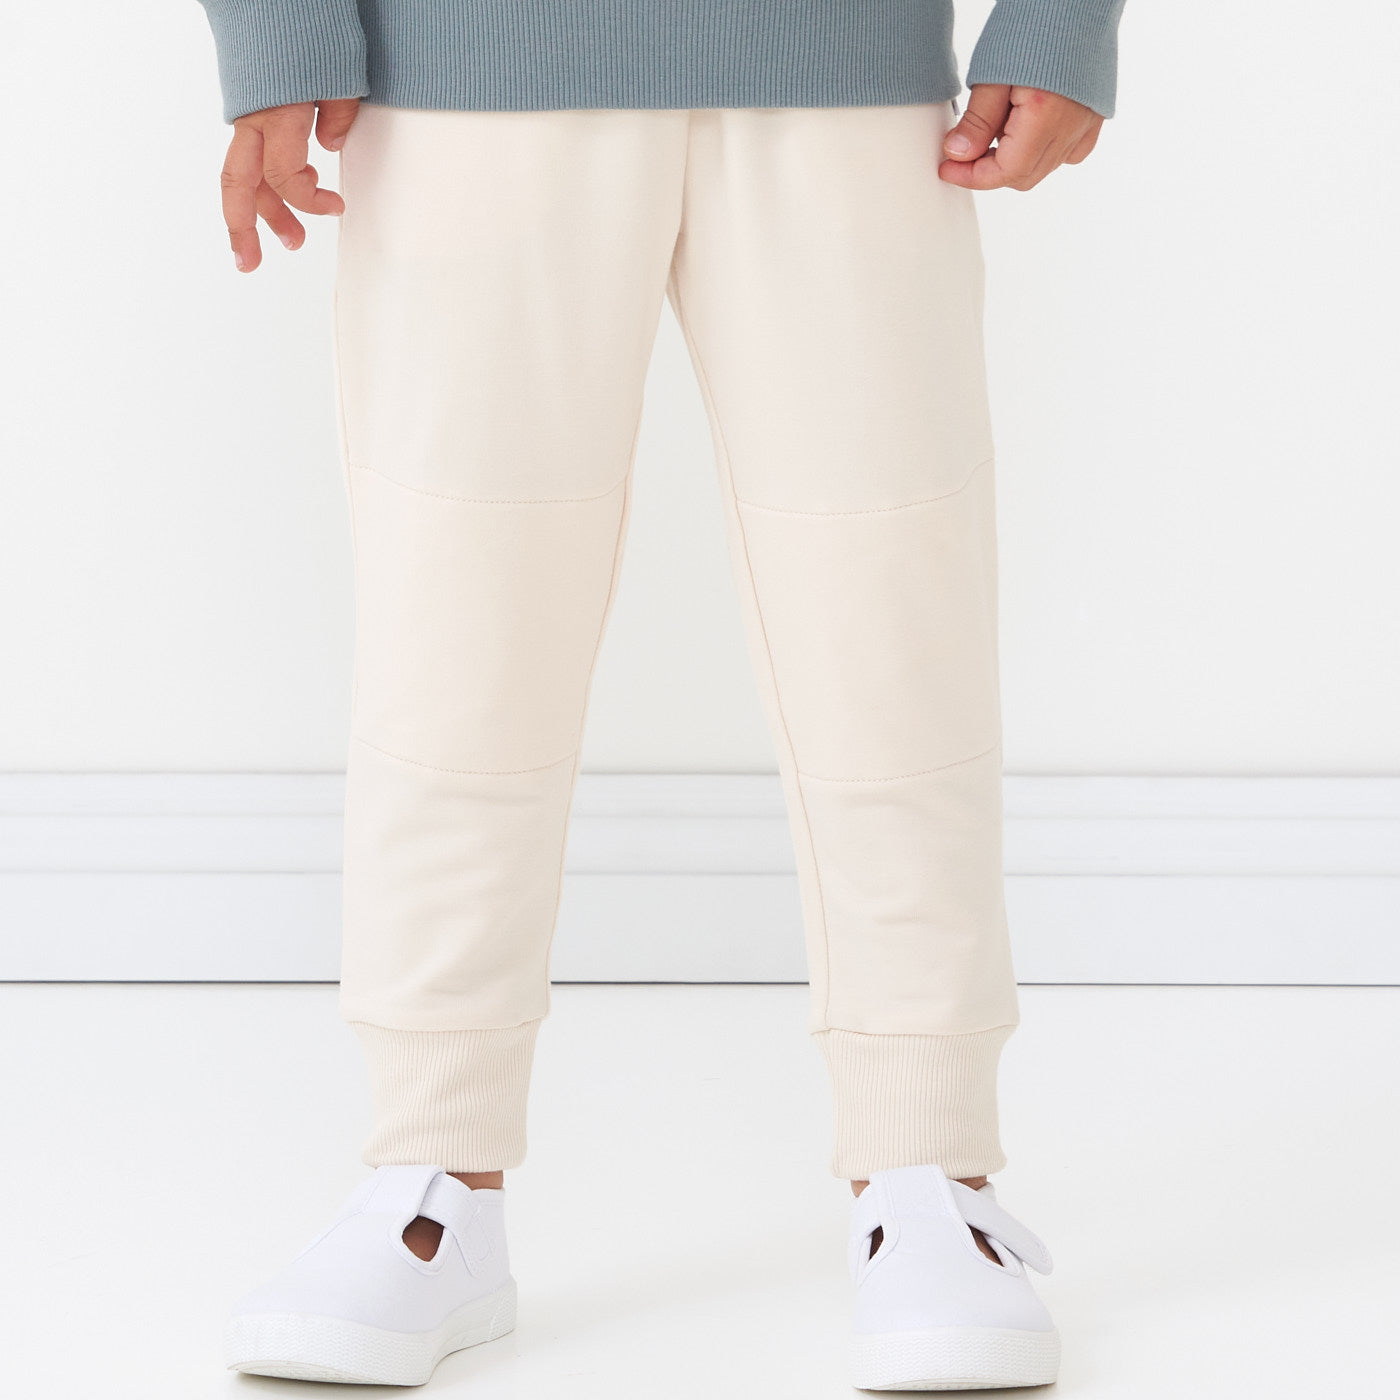 Alternate close up image of a child wearing Cream joggers